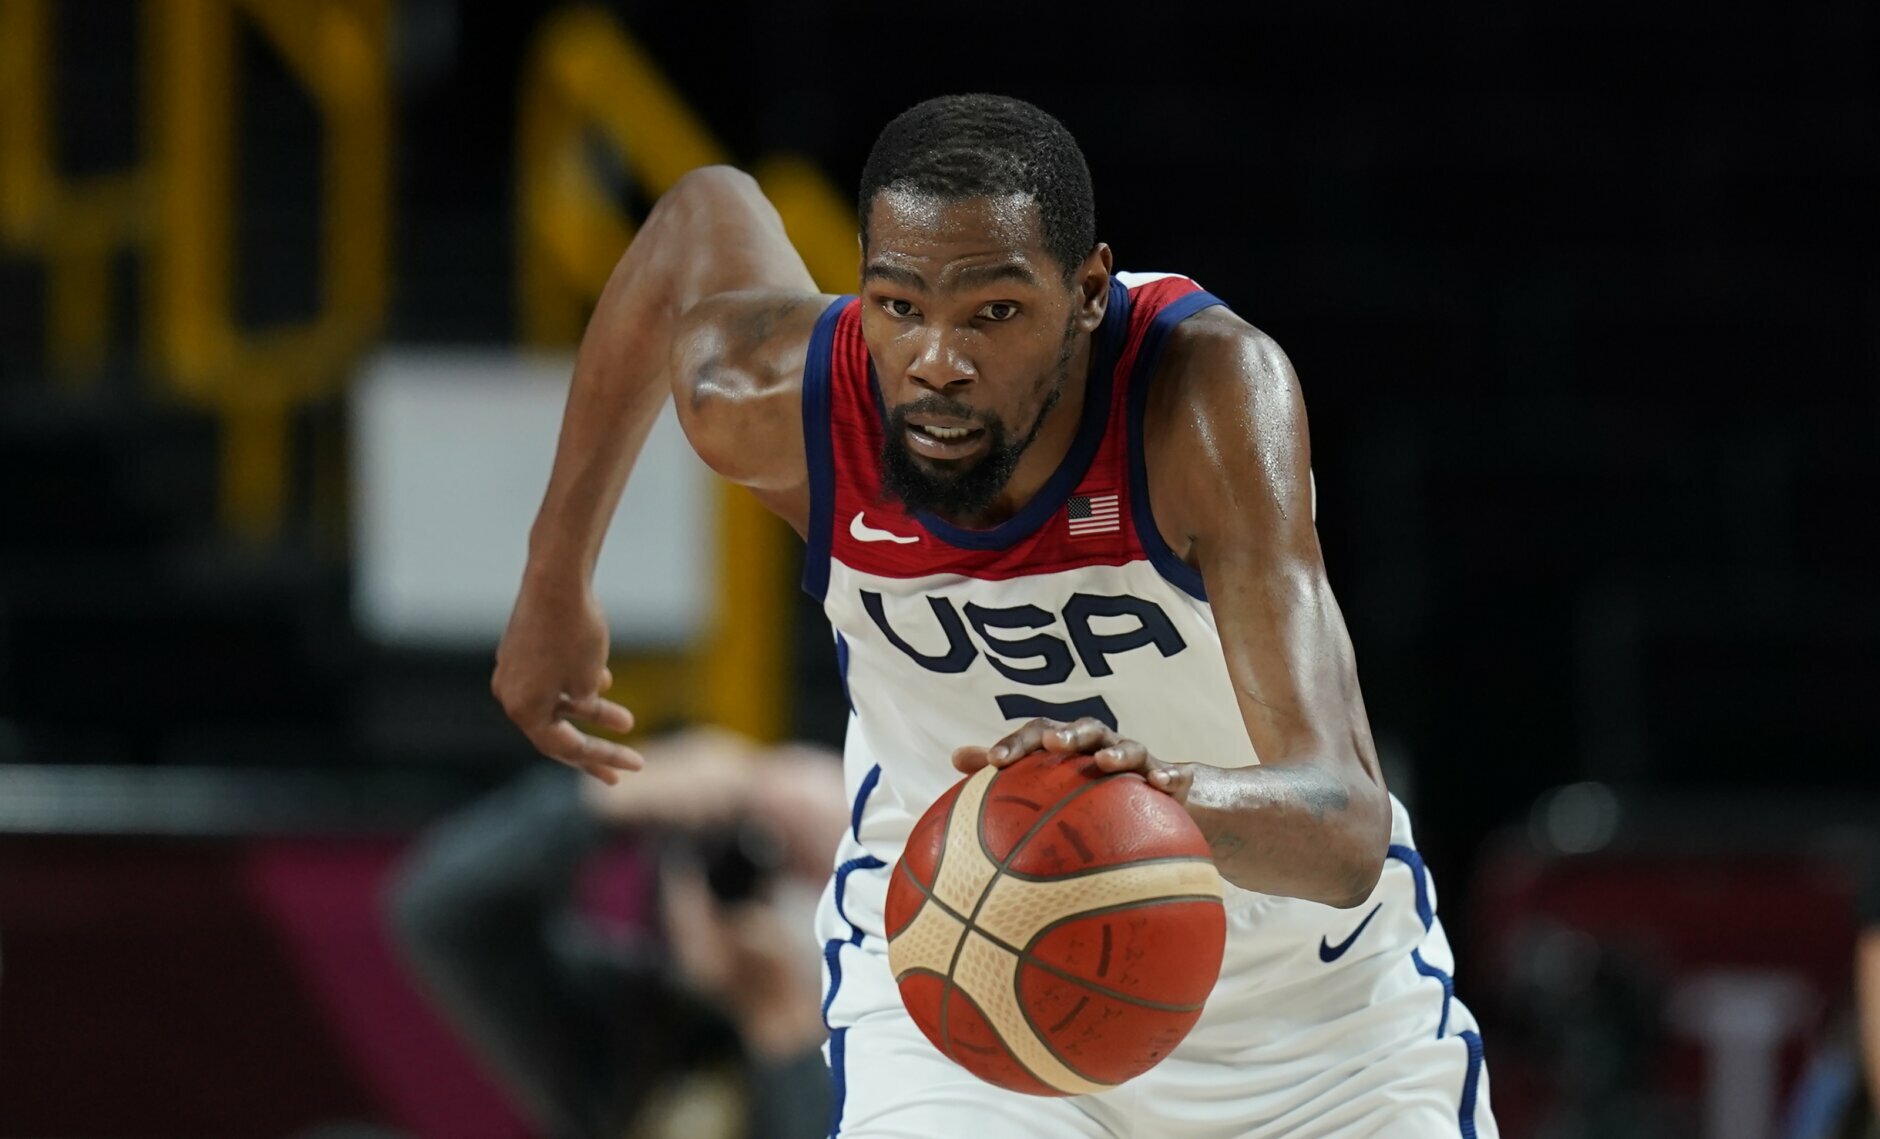 United States' Kevin Durant (7) chases the ball during men's basketball gold medal game against France at the 2020 Summer Olympics, Saturday, Aug. 7, 2021, in Saitama, Japan. (AP Photo/Charlie Neibergall)